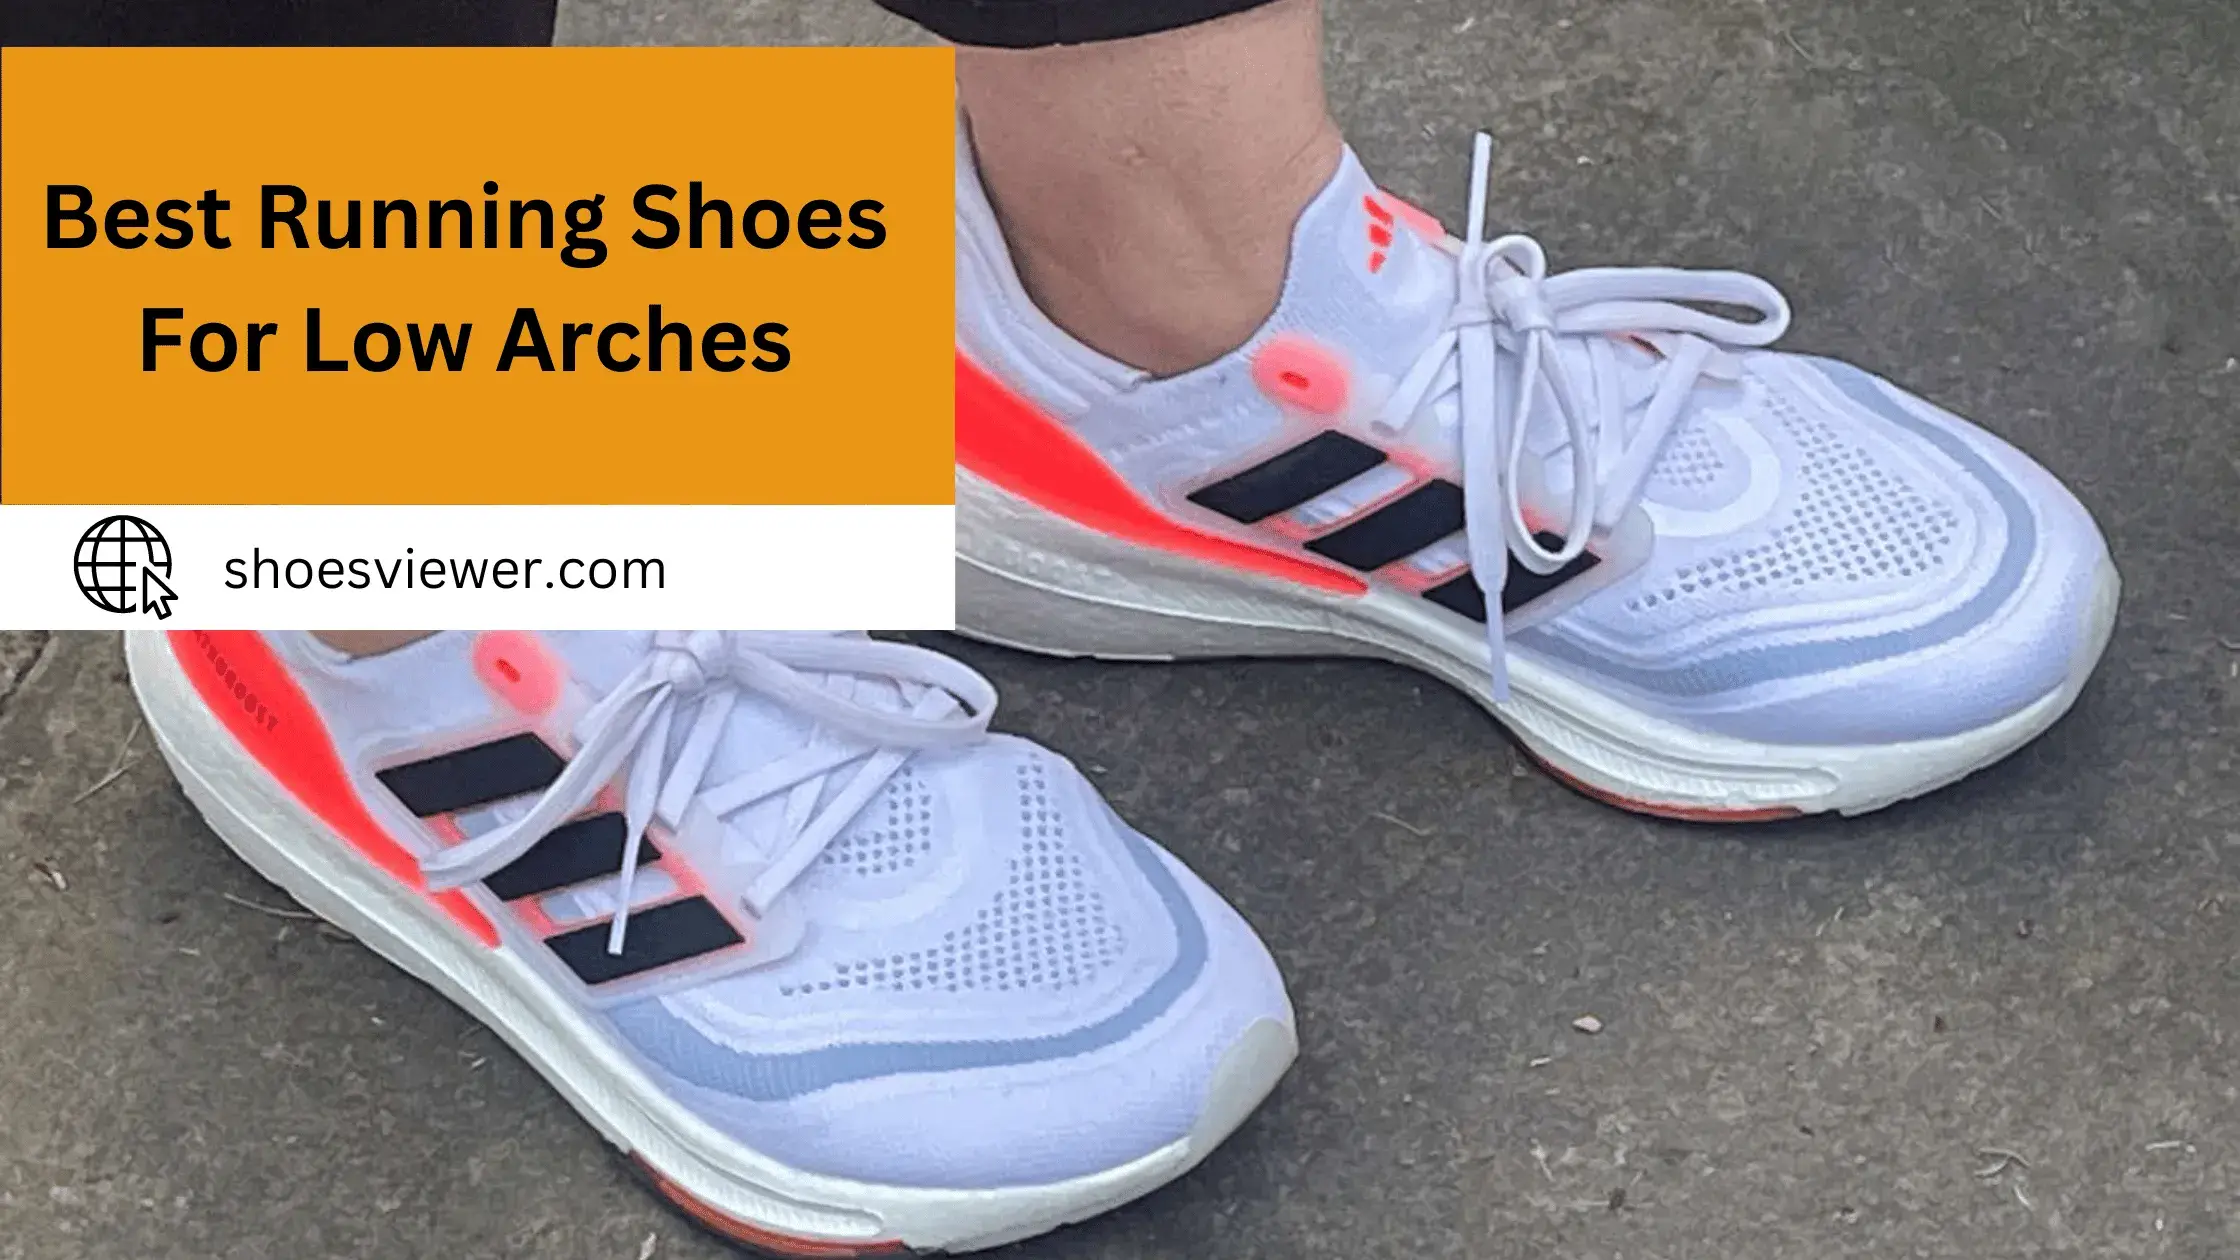 Best Running Shoes For Low Arches - (An In-Depth Guide)